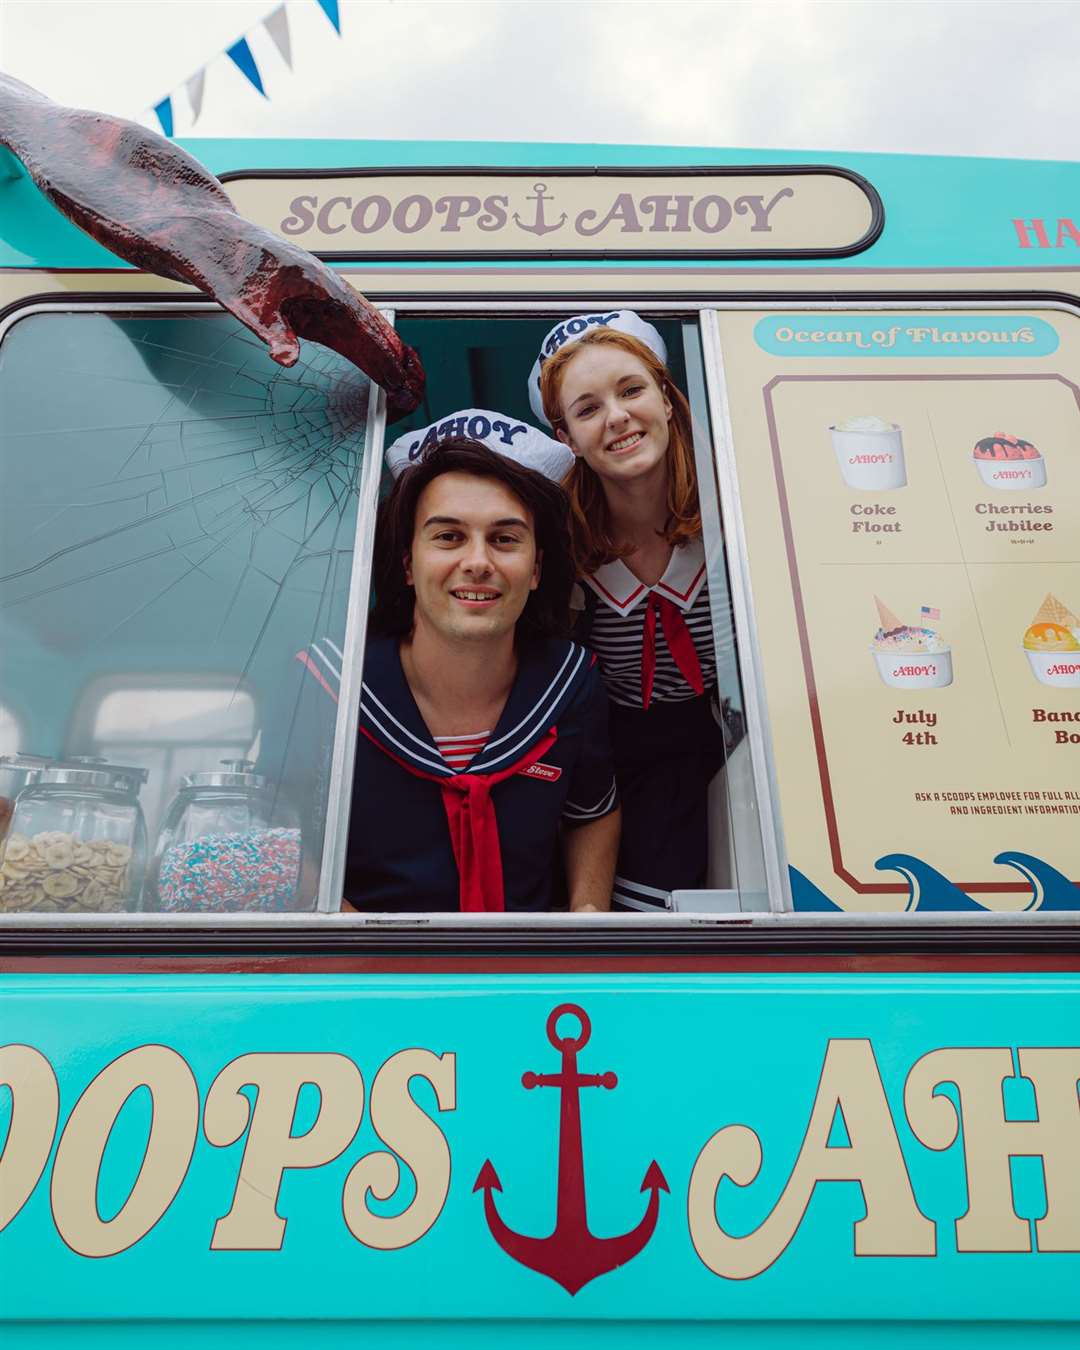 The Stranger Things ice cream van Picture: Kris Humphreys Photography